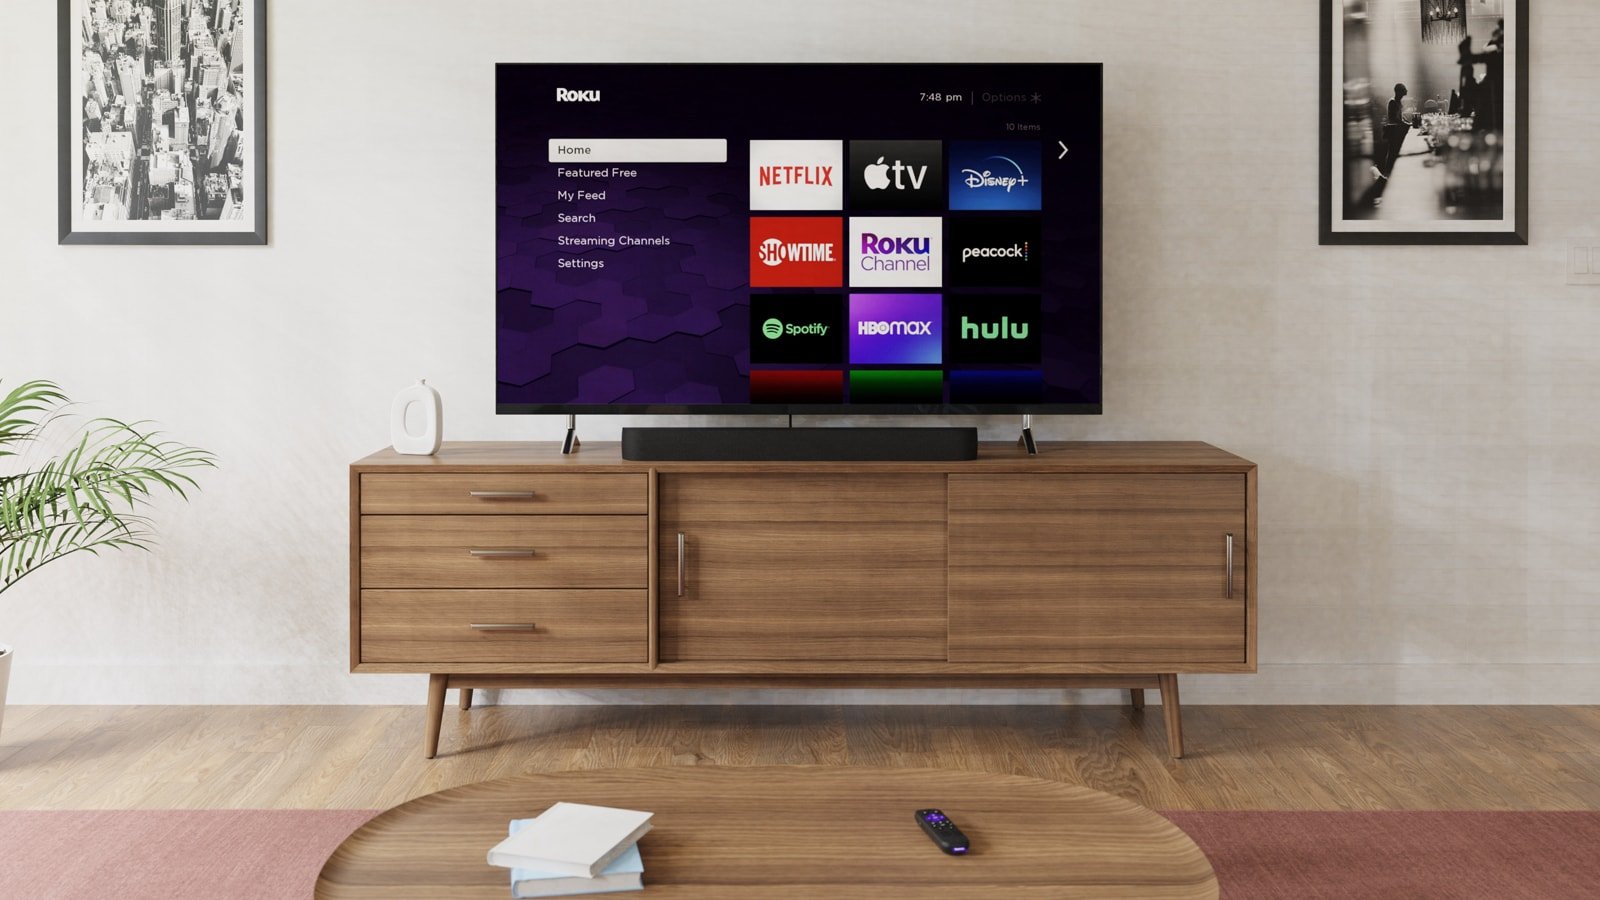 Roku All-in-One Streambar Pro features 4K streaming and cinematic sound